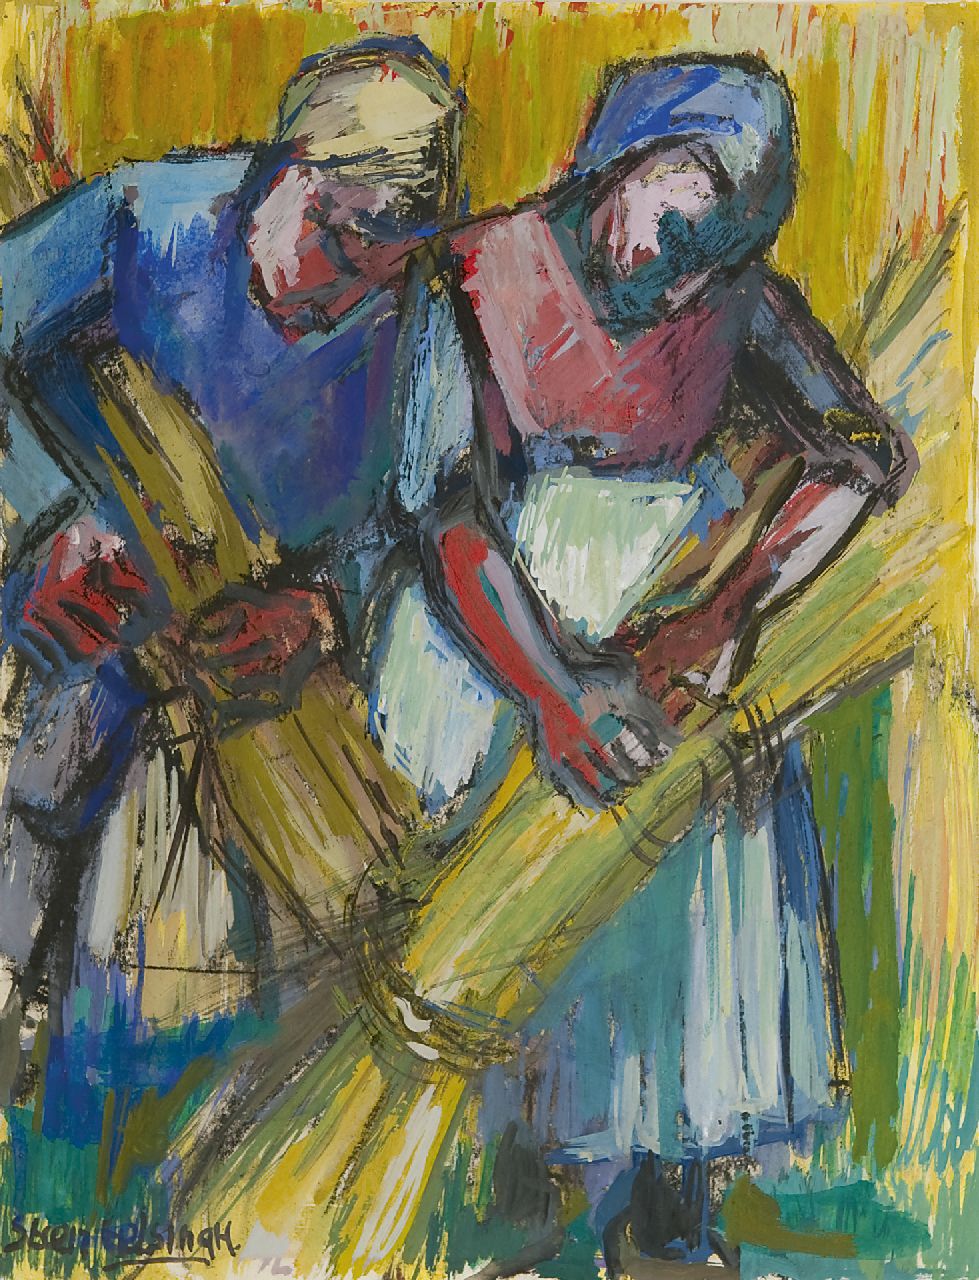 Eelsingh C.  | Christiana 'Stien' Eelsingh, Harvesting couple, gouache on paper 32.5 x 24.5 cm, signed l.l. and painted ca. 1950-1955